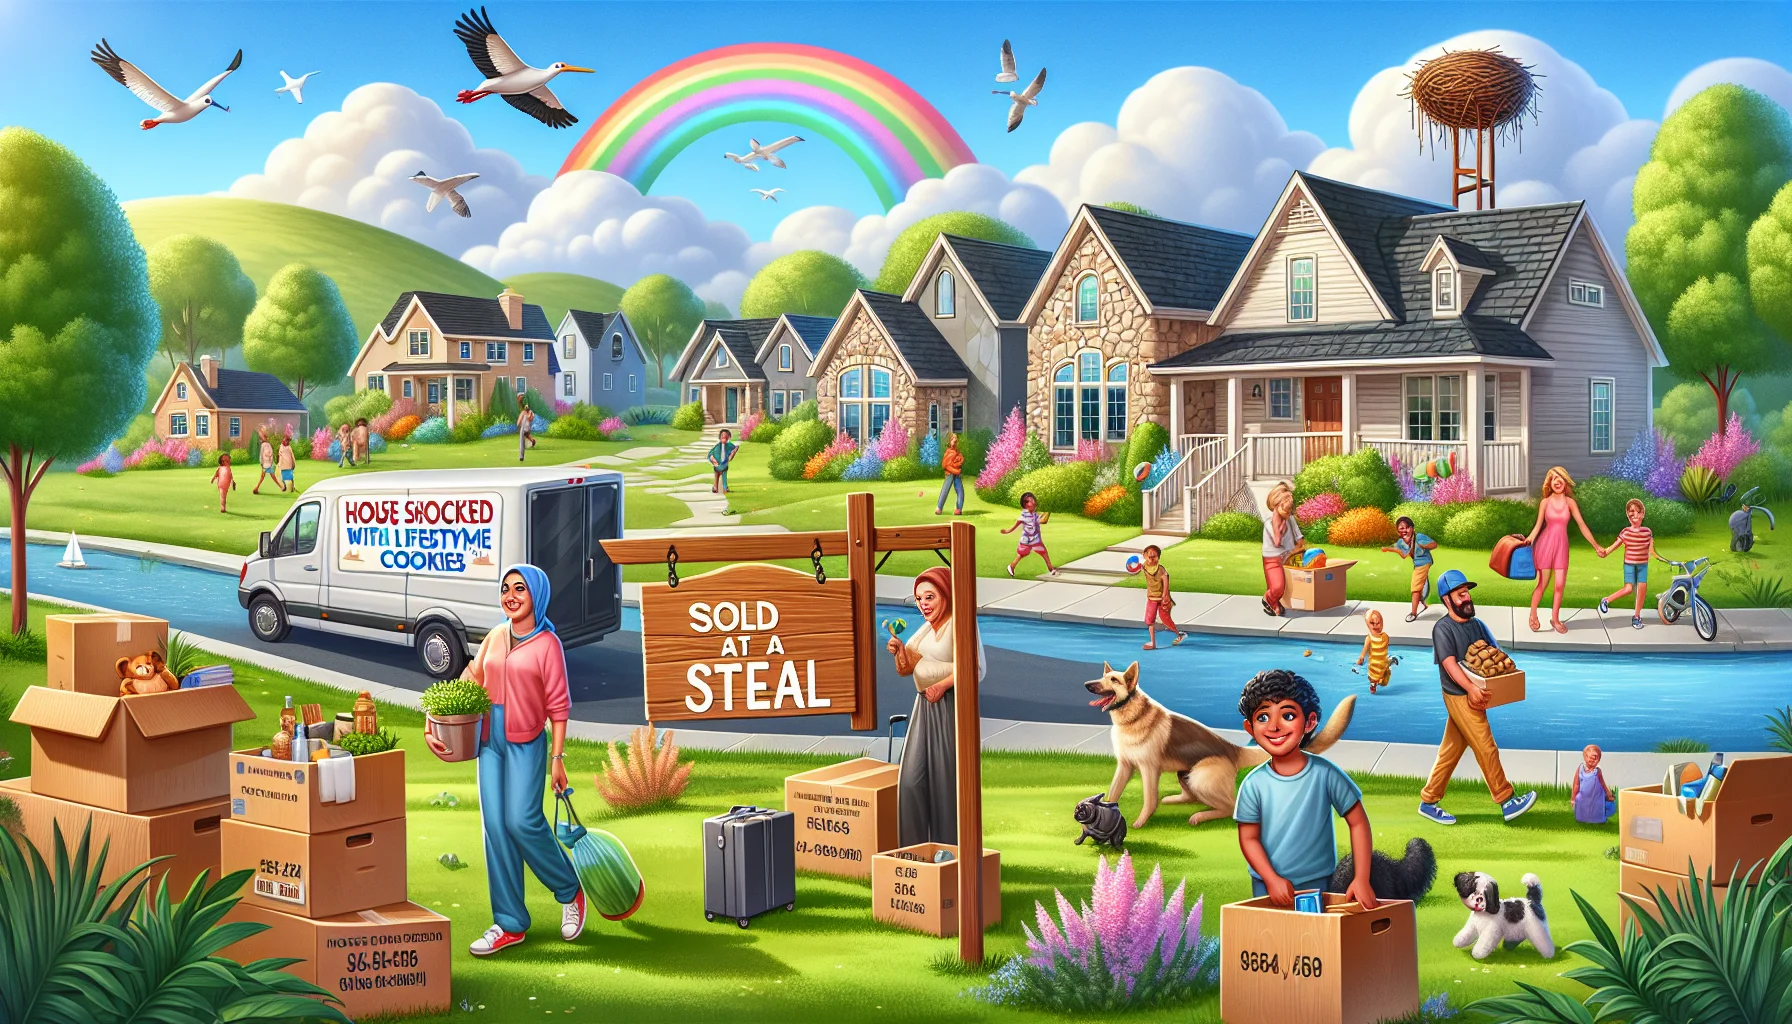 Create an image representing the ideal situation regarding real estate. Show a picturesque neighborhood with well-kept, spacious houses surrounded by luscious greenery and children playing. A wooden sign in the yard of one house reads, 'Sold at a Steal!'. A diverse group of people are moving in - a Middle-Eastern woman carrying a plant, a South Asian man holding a box labelled 'kitchen utensils', a Caucasian boy playing with a dog, and a Black woman holding the house keys and smiling. Additionally, incorporate humorous elements such as a stork's nest on a chimney, painted on the moving van 'House stocked with lifetime cookies supply', and a rainbow covering the sky.